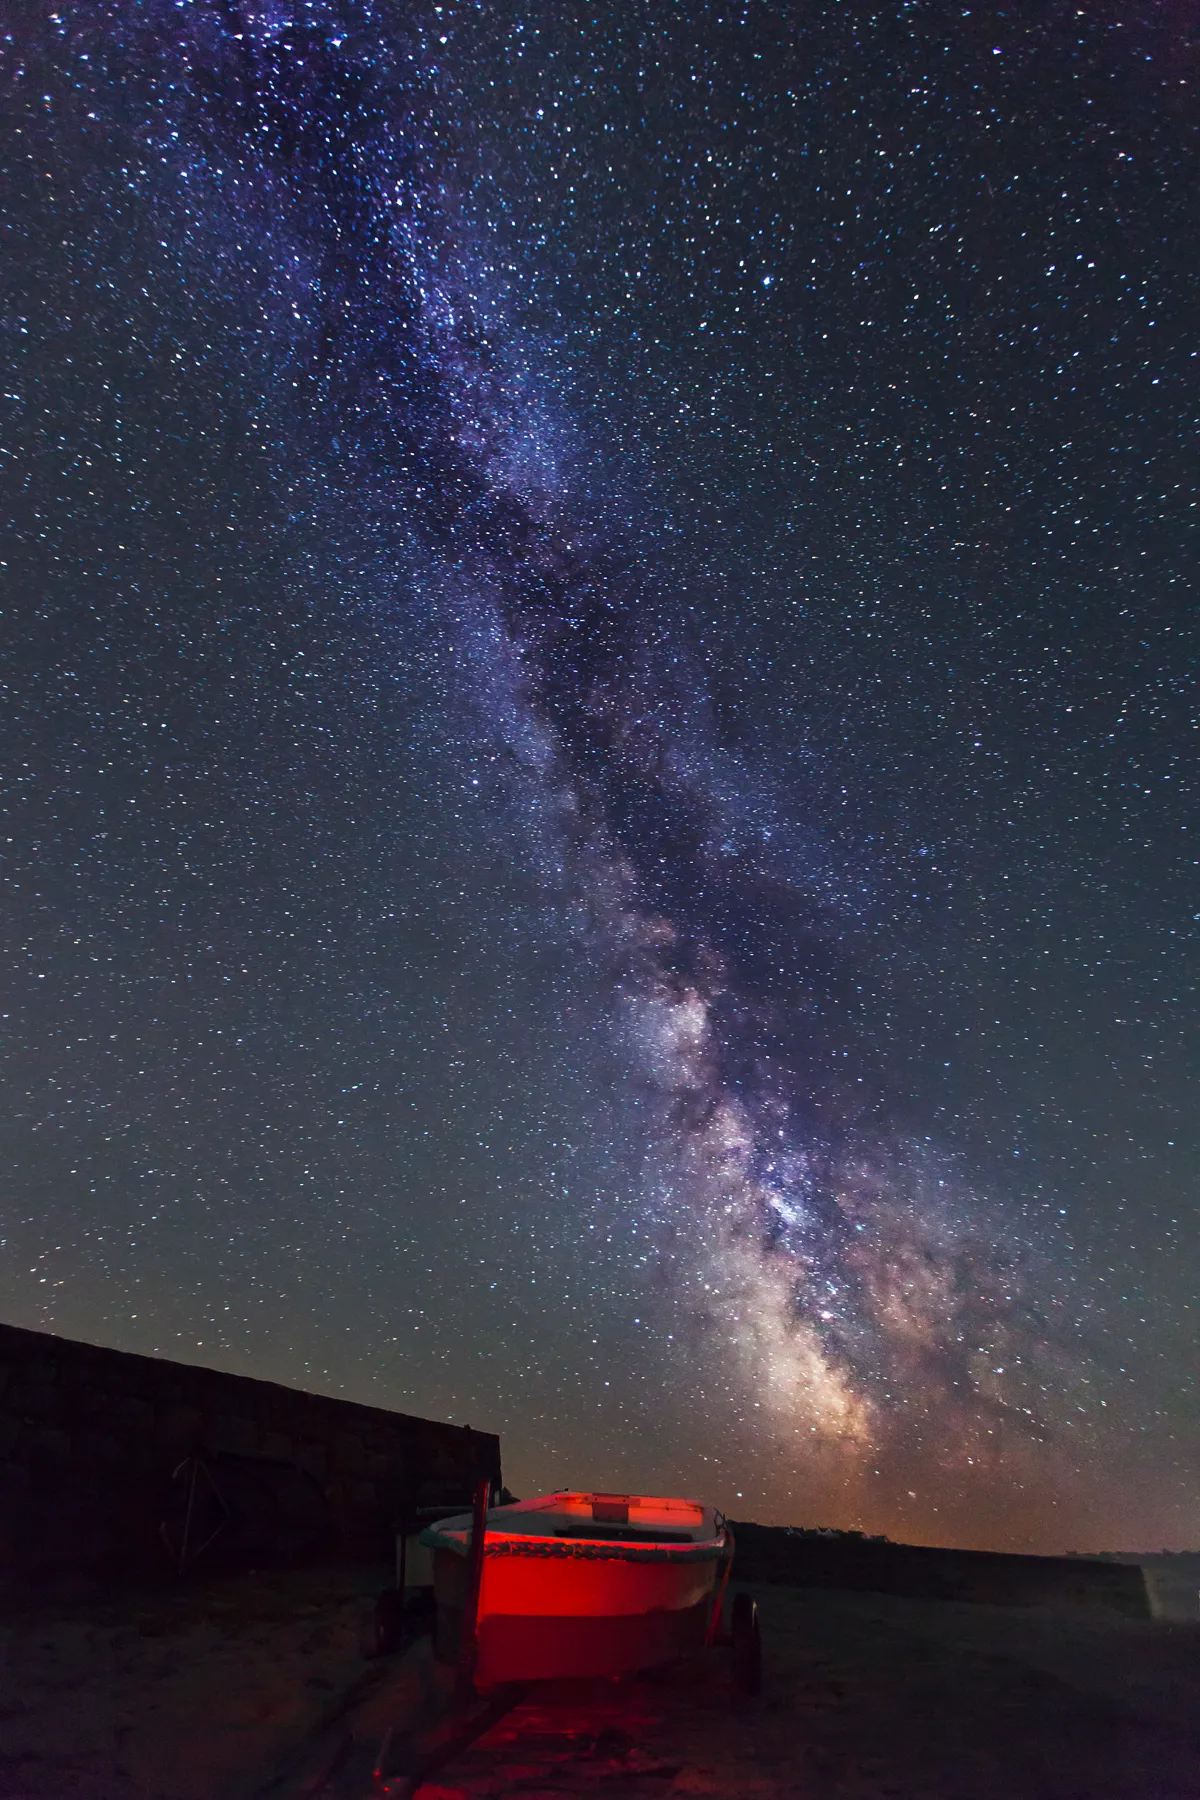 Milky Way from Rocquaine Bay, Guernsey by JM Dean, Guernsey, Channel Islands. Equipment: Canon 5D MKII, tripod.